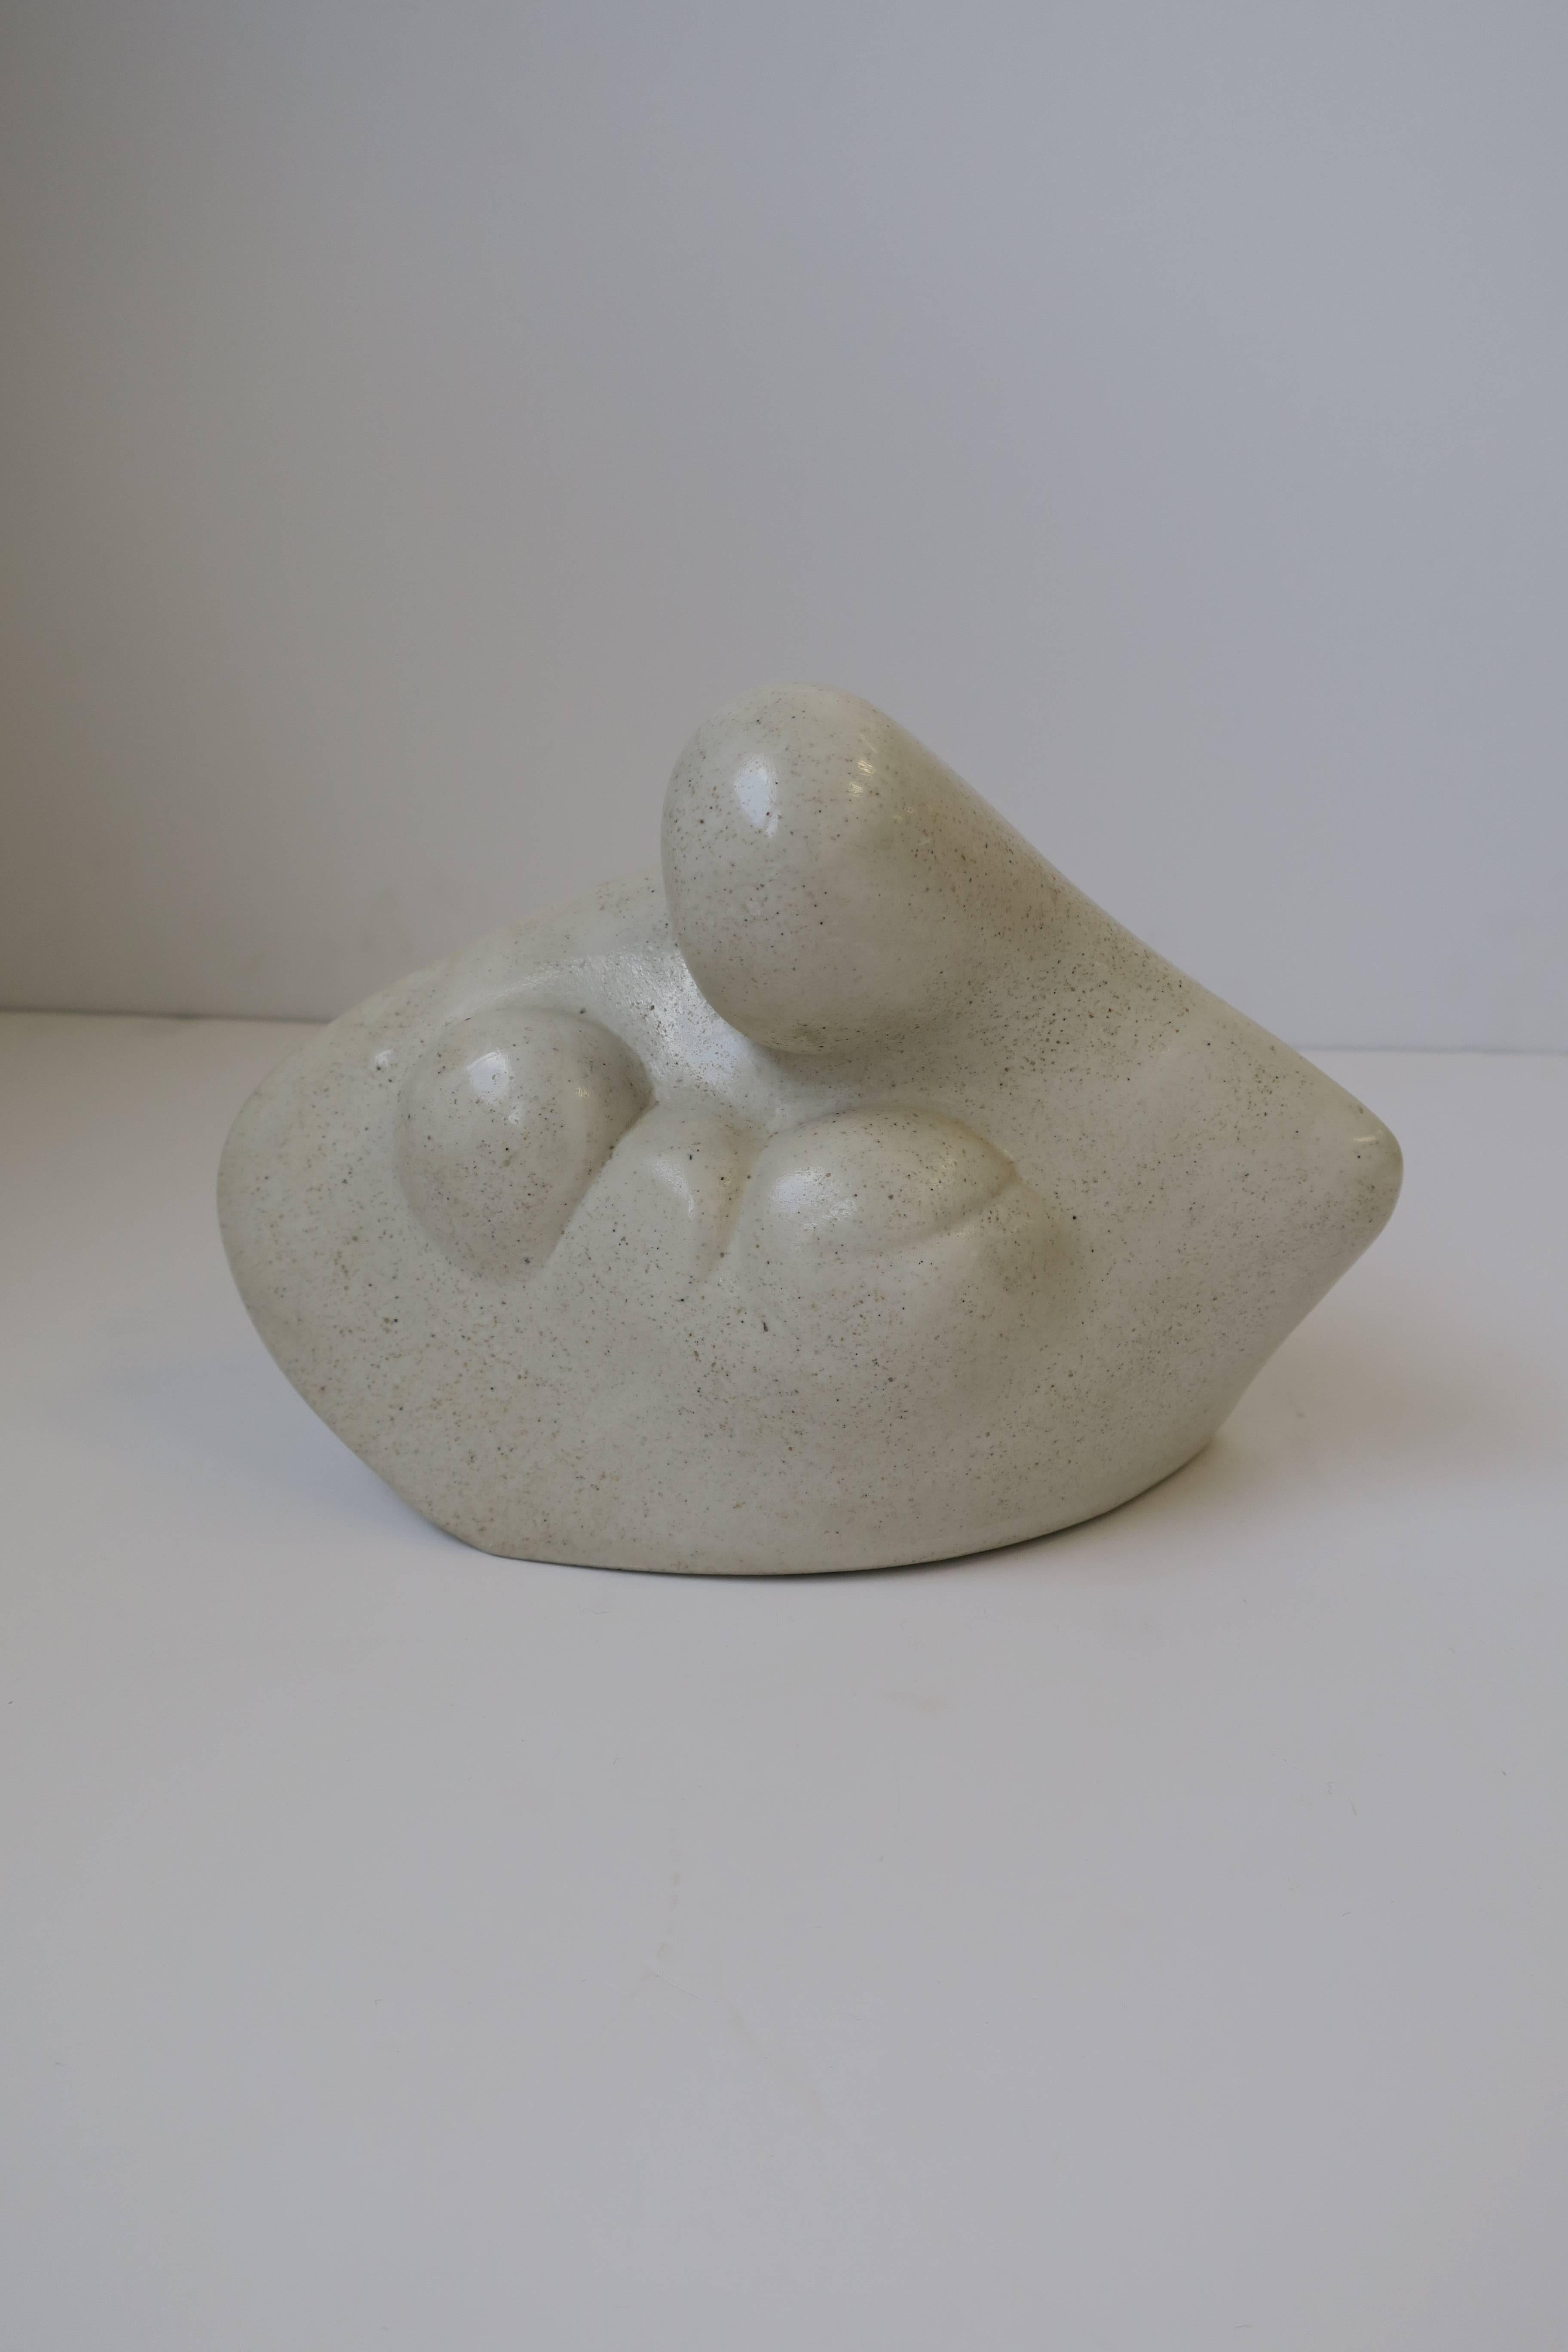 A beautiful signed post-modern mother-and-child hand-carved stone sculpture, circa 1980s. 

Measurements include: 6.5 in. H x 9 in. W x 5 in. D

Item available here online. By request, item can be made available by appointment to the Trade in New